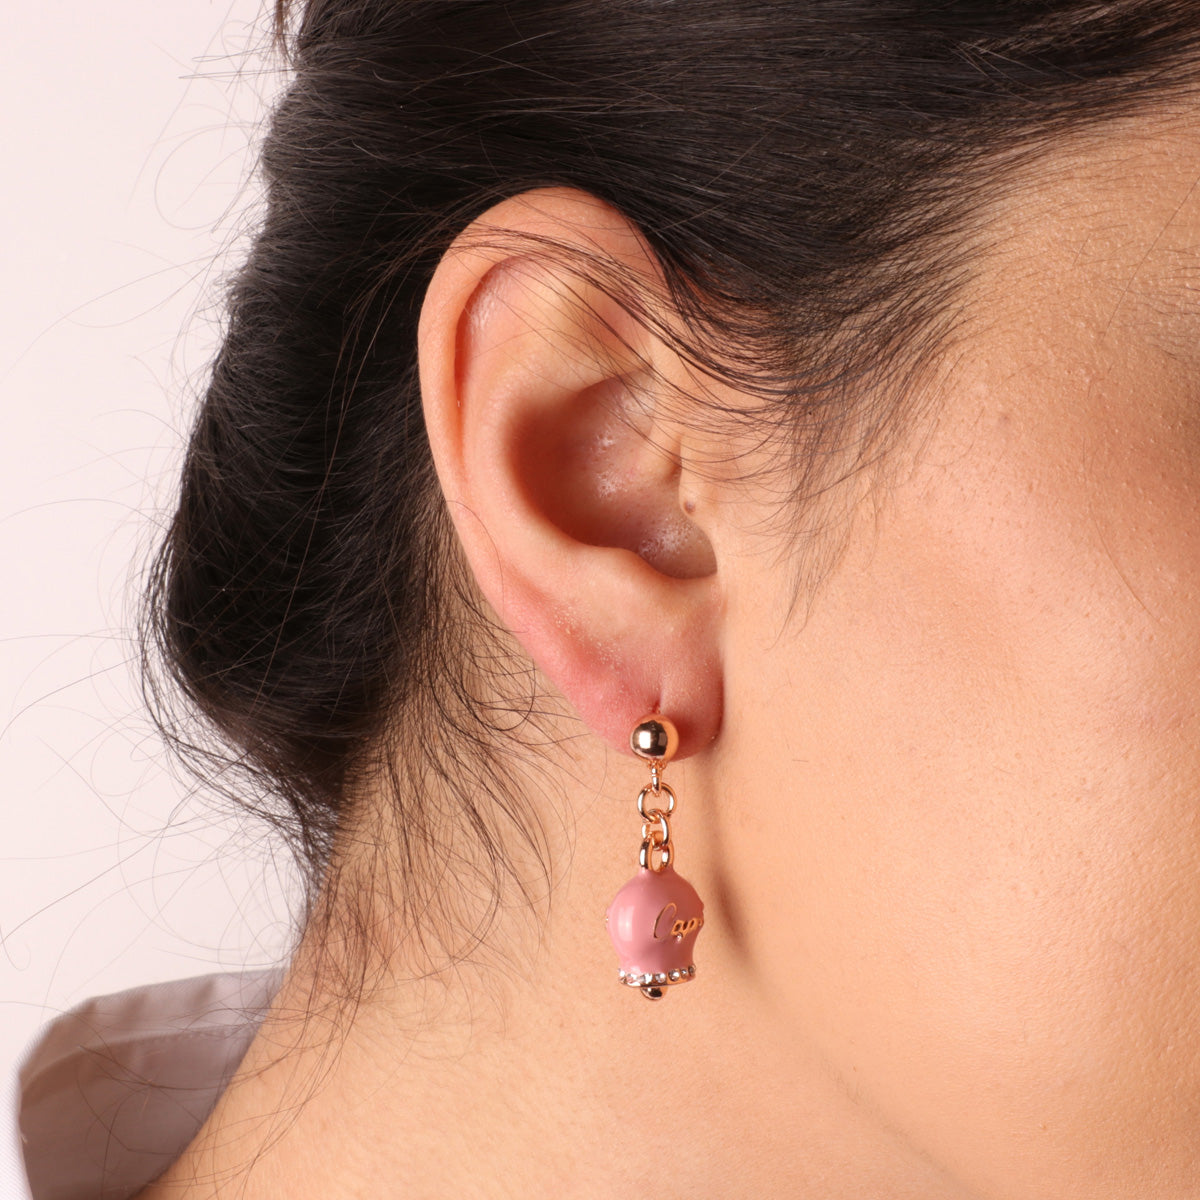 Metal earrings with bell pendant pink enamel, embellished with crystals